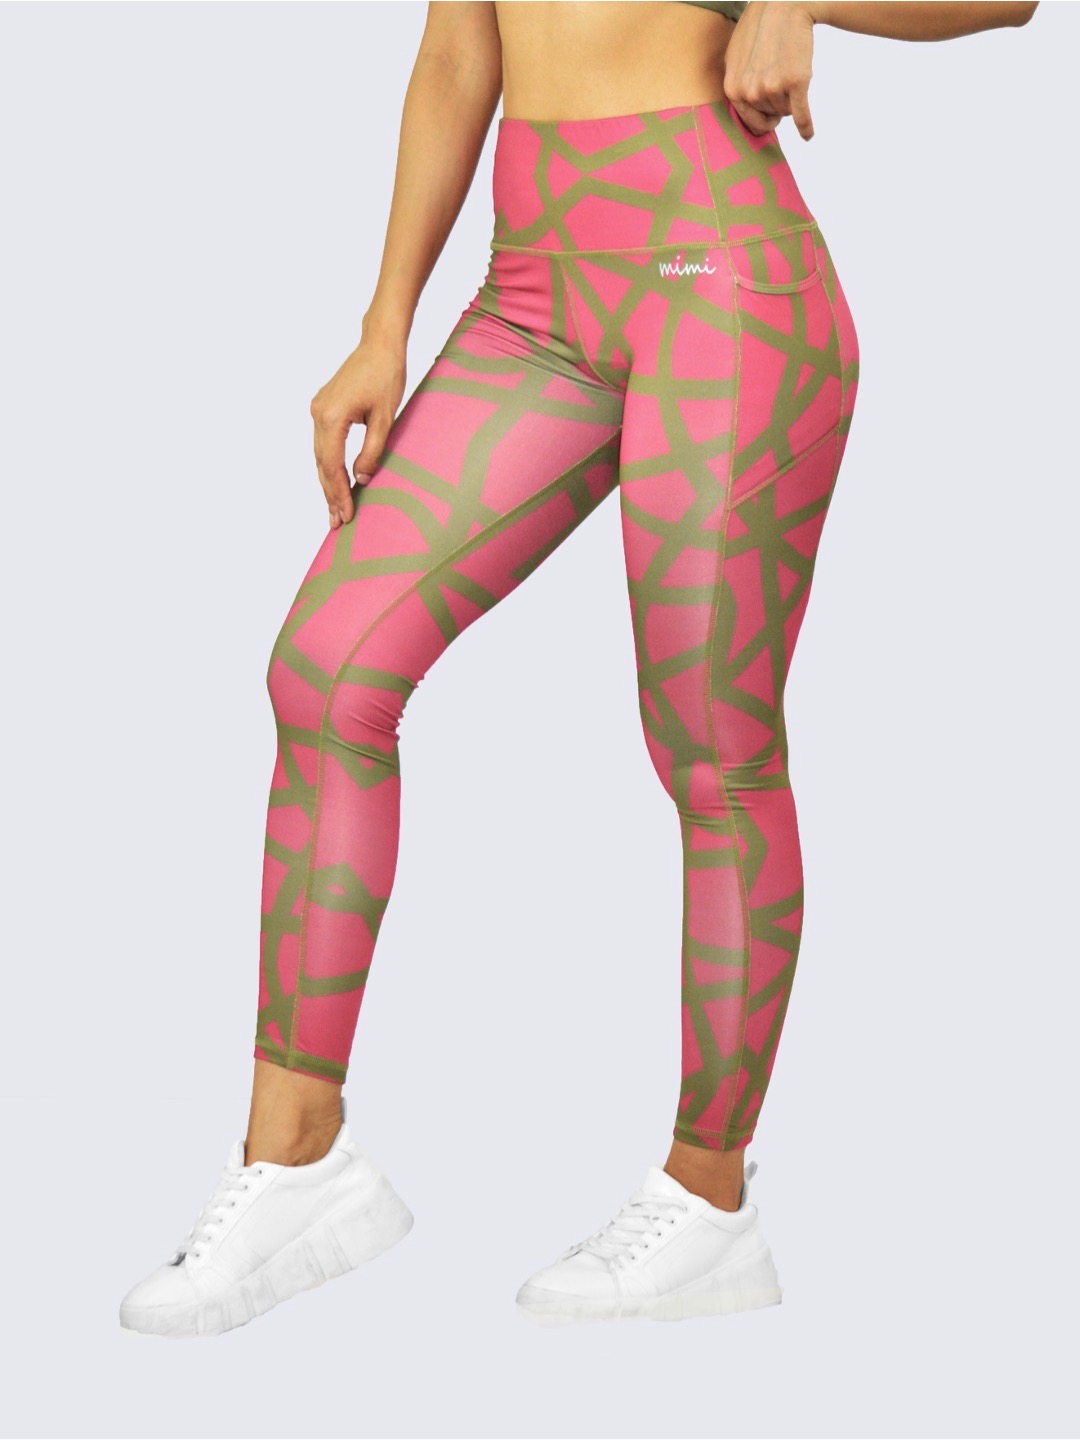 mimi by michelle salins Pocket Full Of Plums Print Full Length Leggings front view